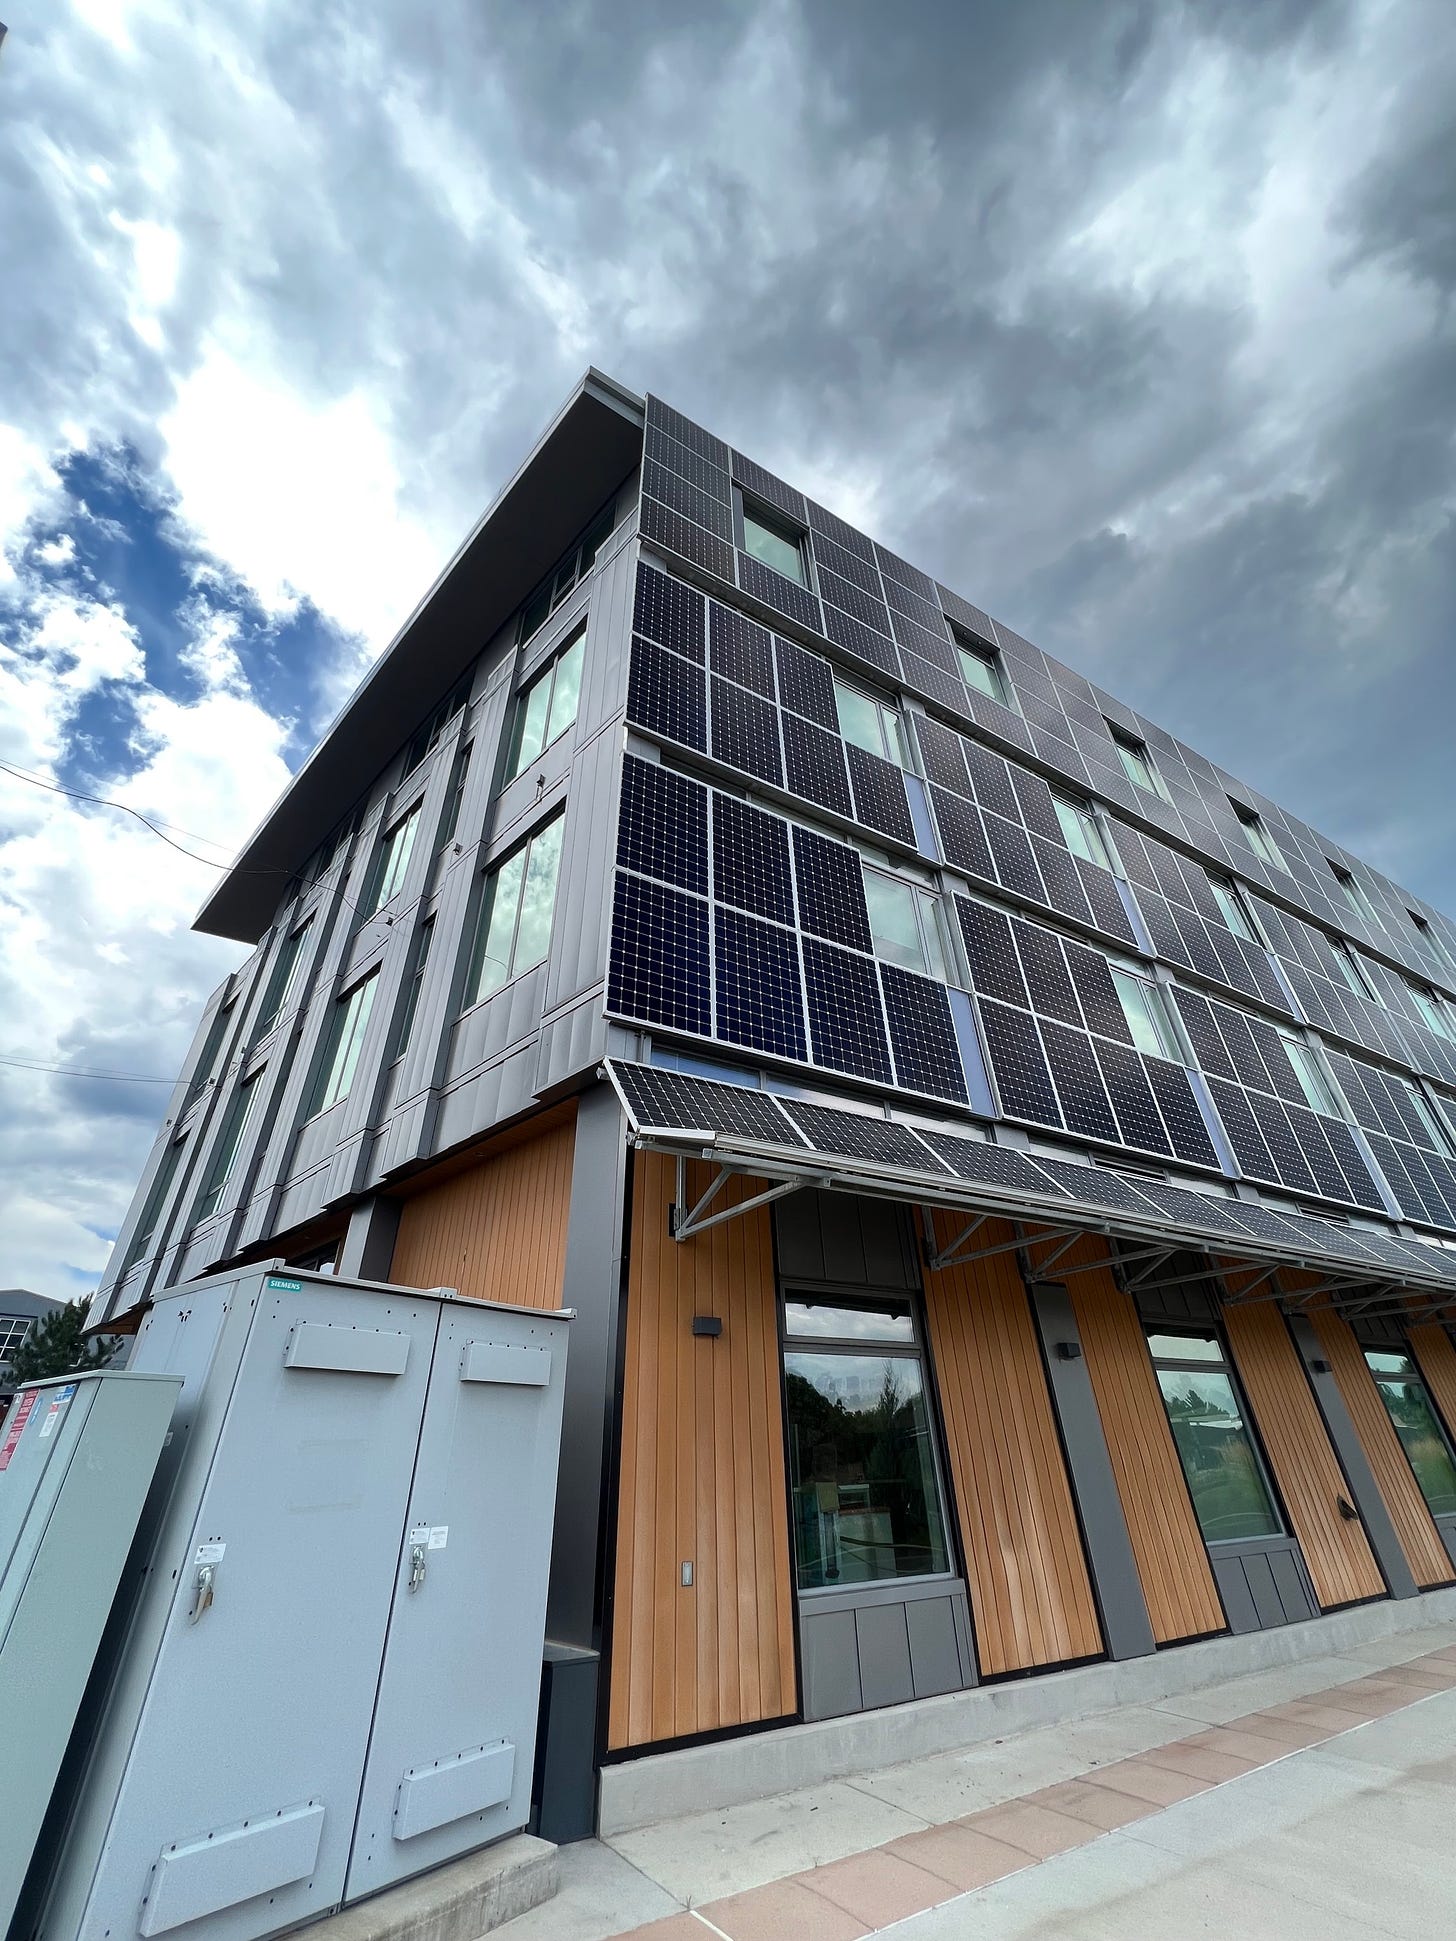 The RMI Boulder office building. The east wall is almost entirely covered by vertical solar panels, interspersed with windows.